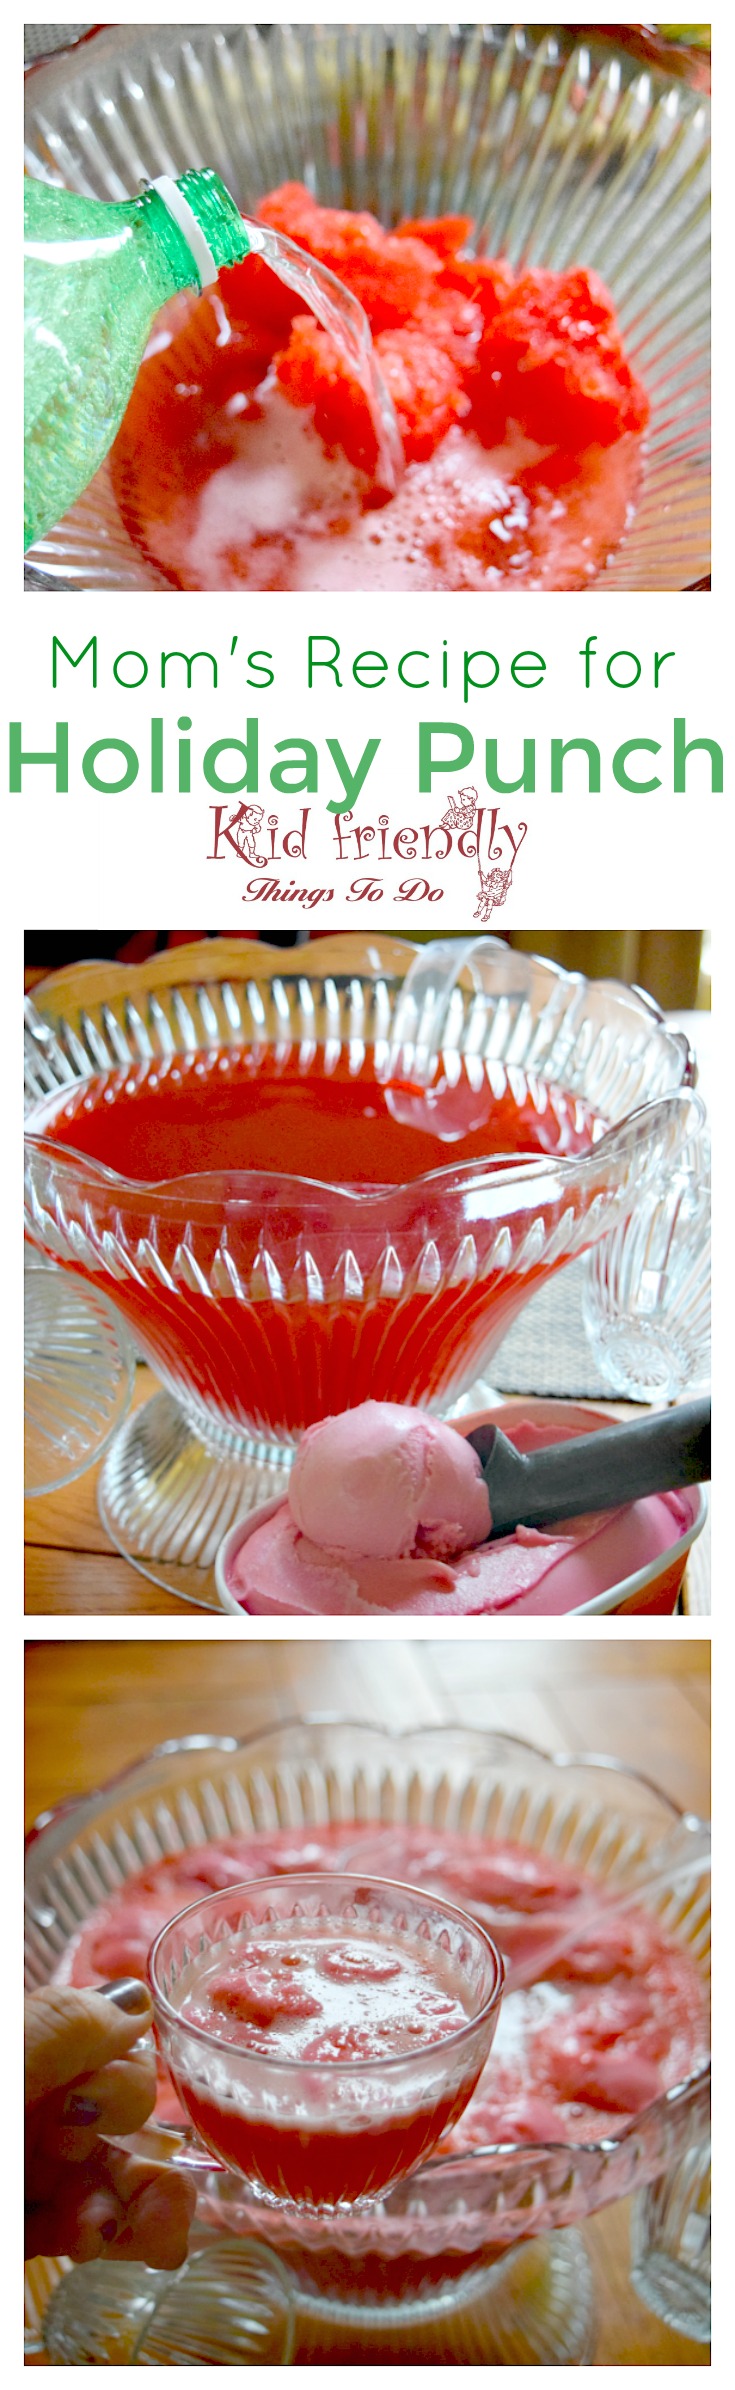 Mom's Recipe for Easy Raspberry Sherbert and Cranberry Holiday Punch